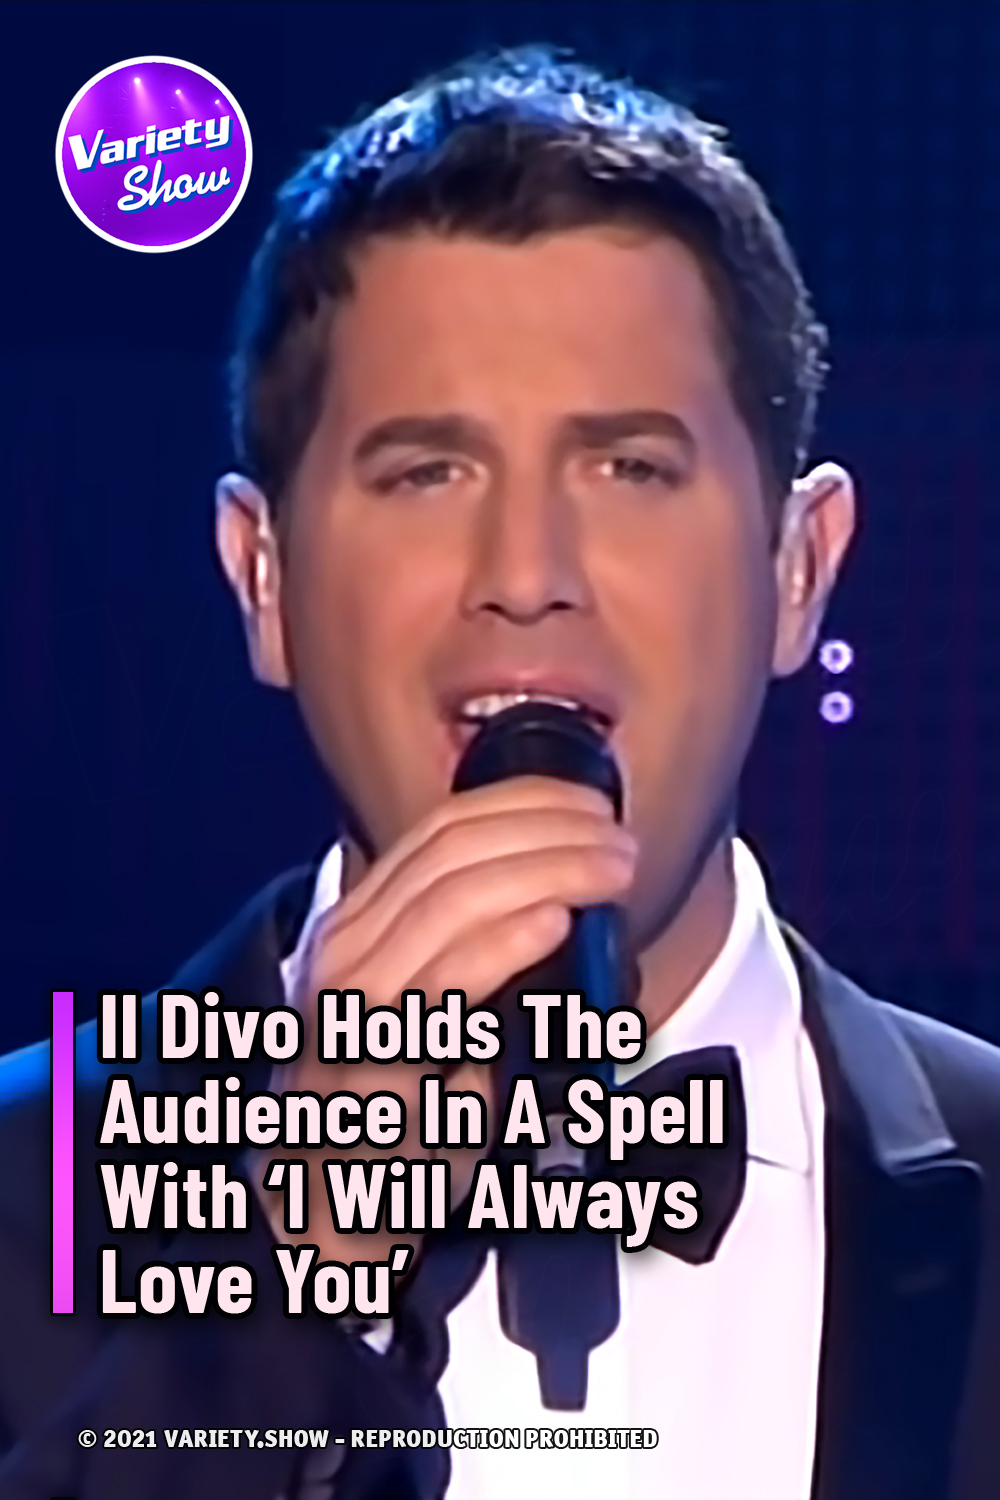 Il Divo Holds The Audience In A Spell With ‘I Will Always Love You’